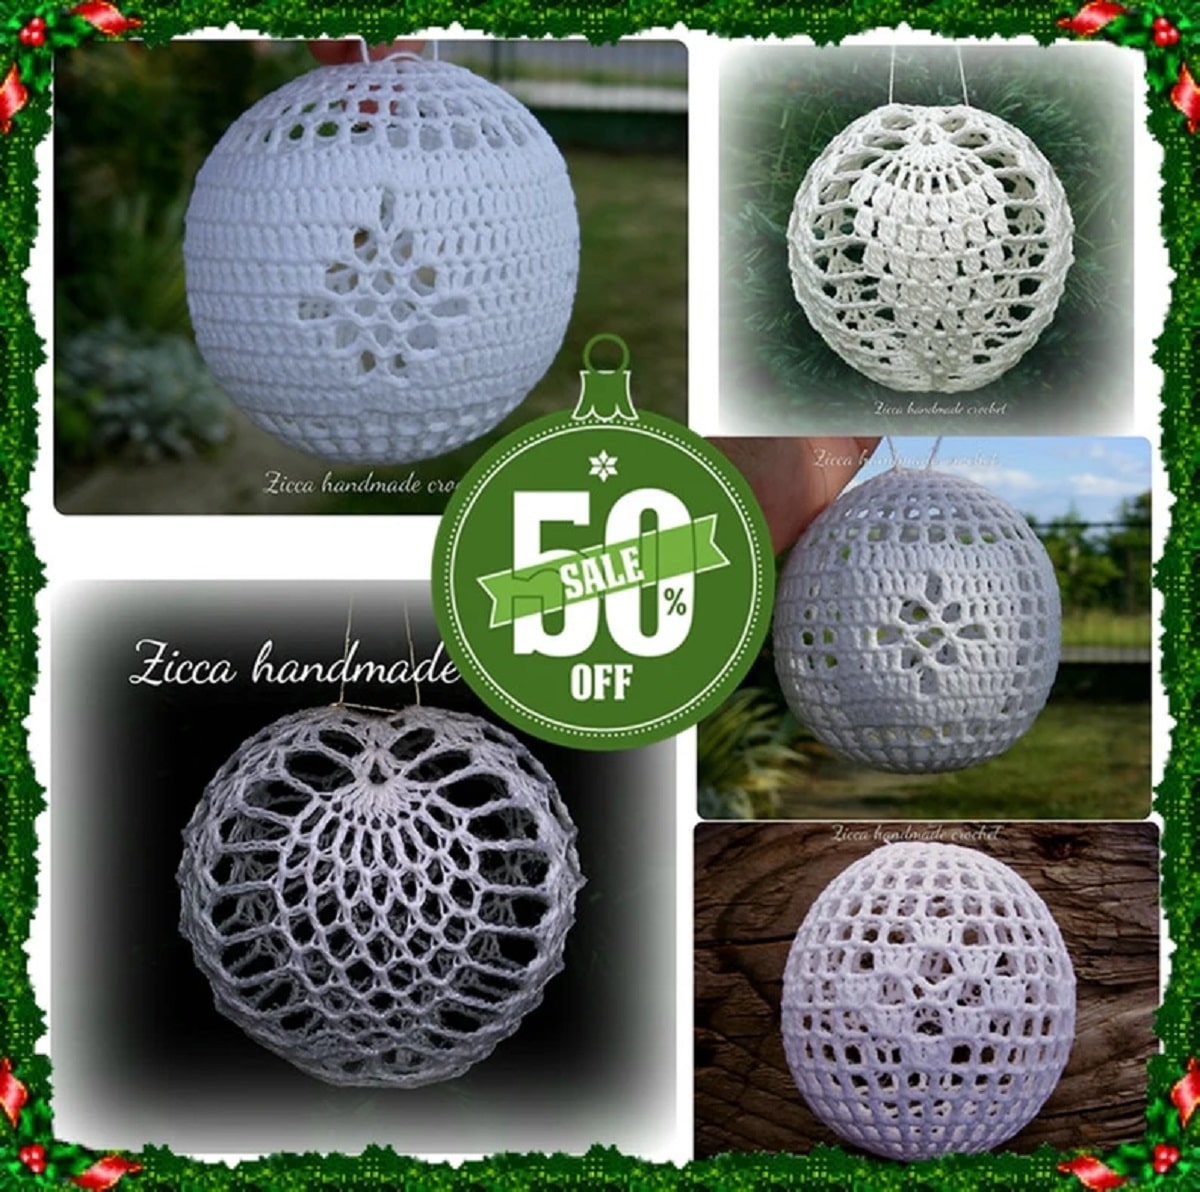 Five gray, cream, and purple crochet Christmas tree baubles with different patterns in a collage together.